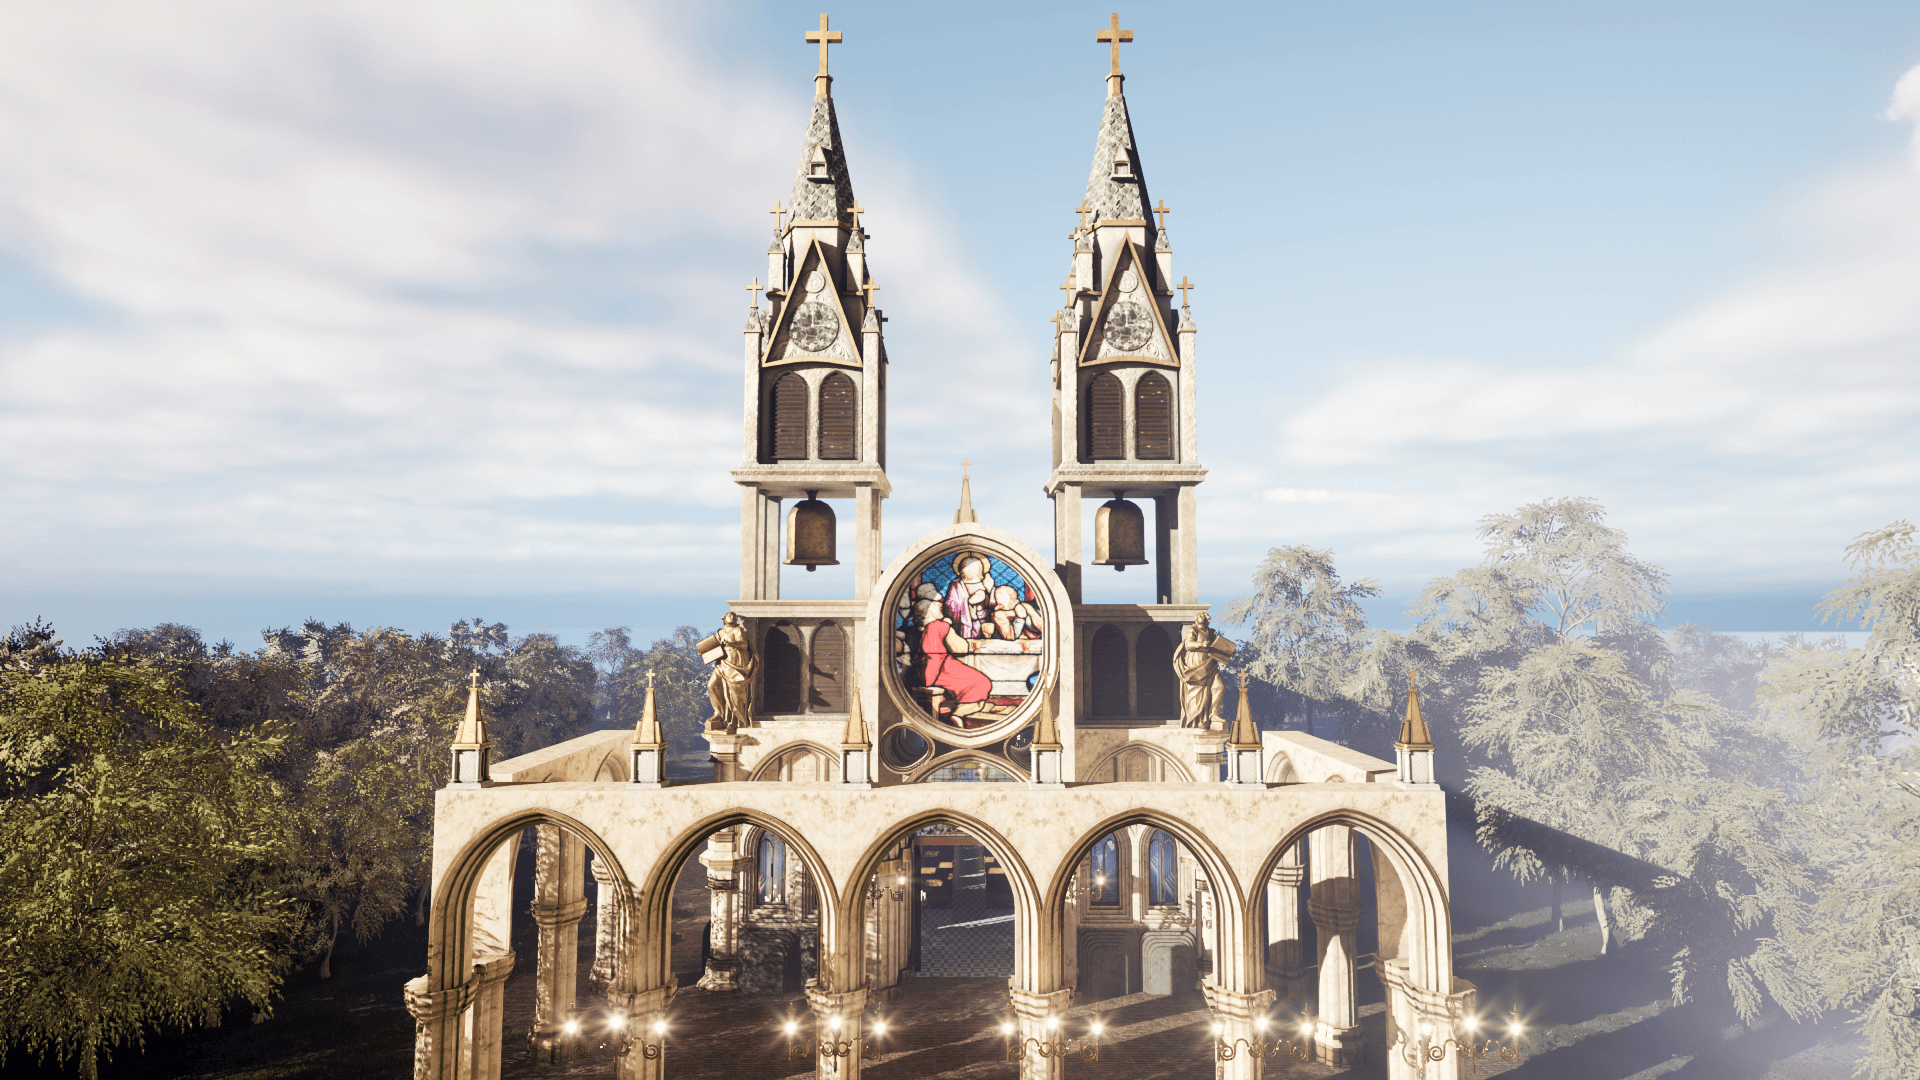 An image showing the Cathedral 4. asset pack, created with Unreal Engine